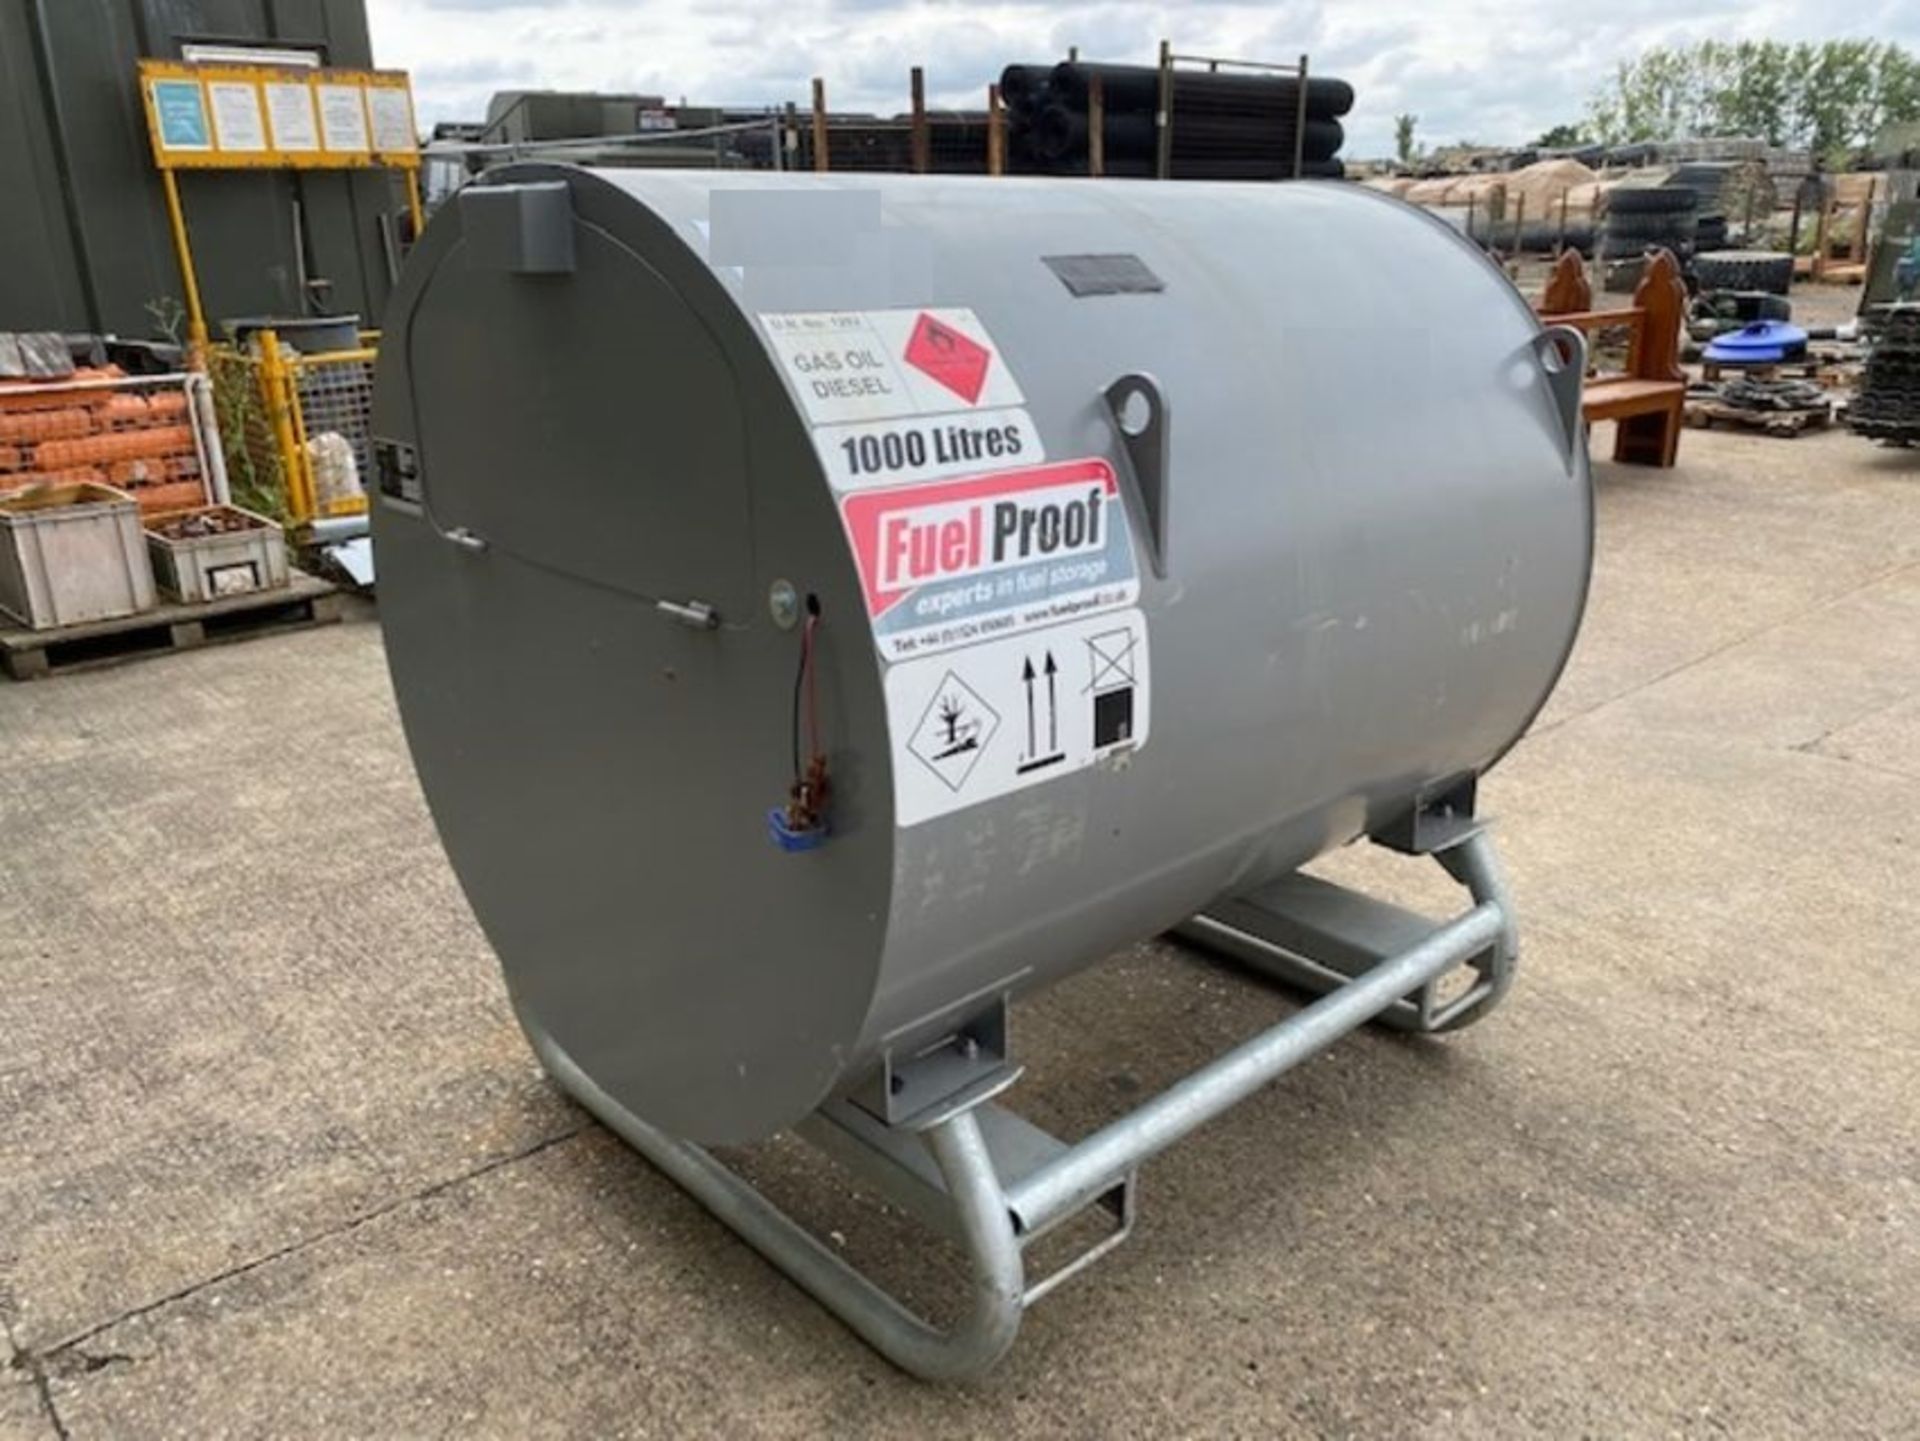 Fuelproof 1000 litre bunded fuel tank - Image 10 of 16